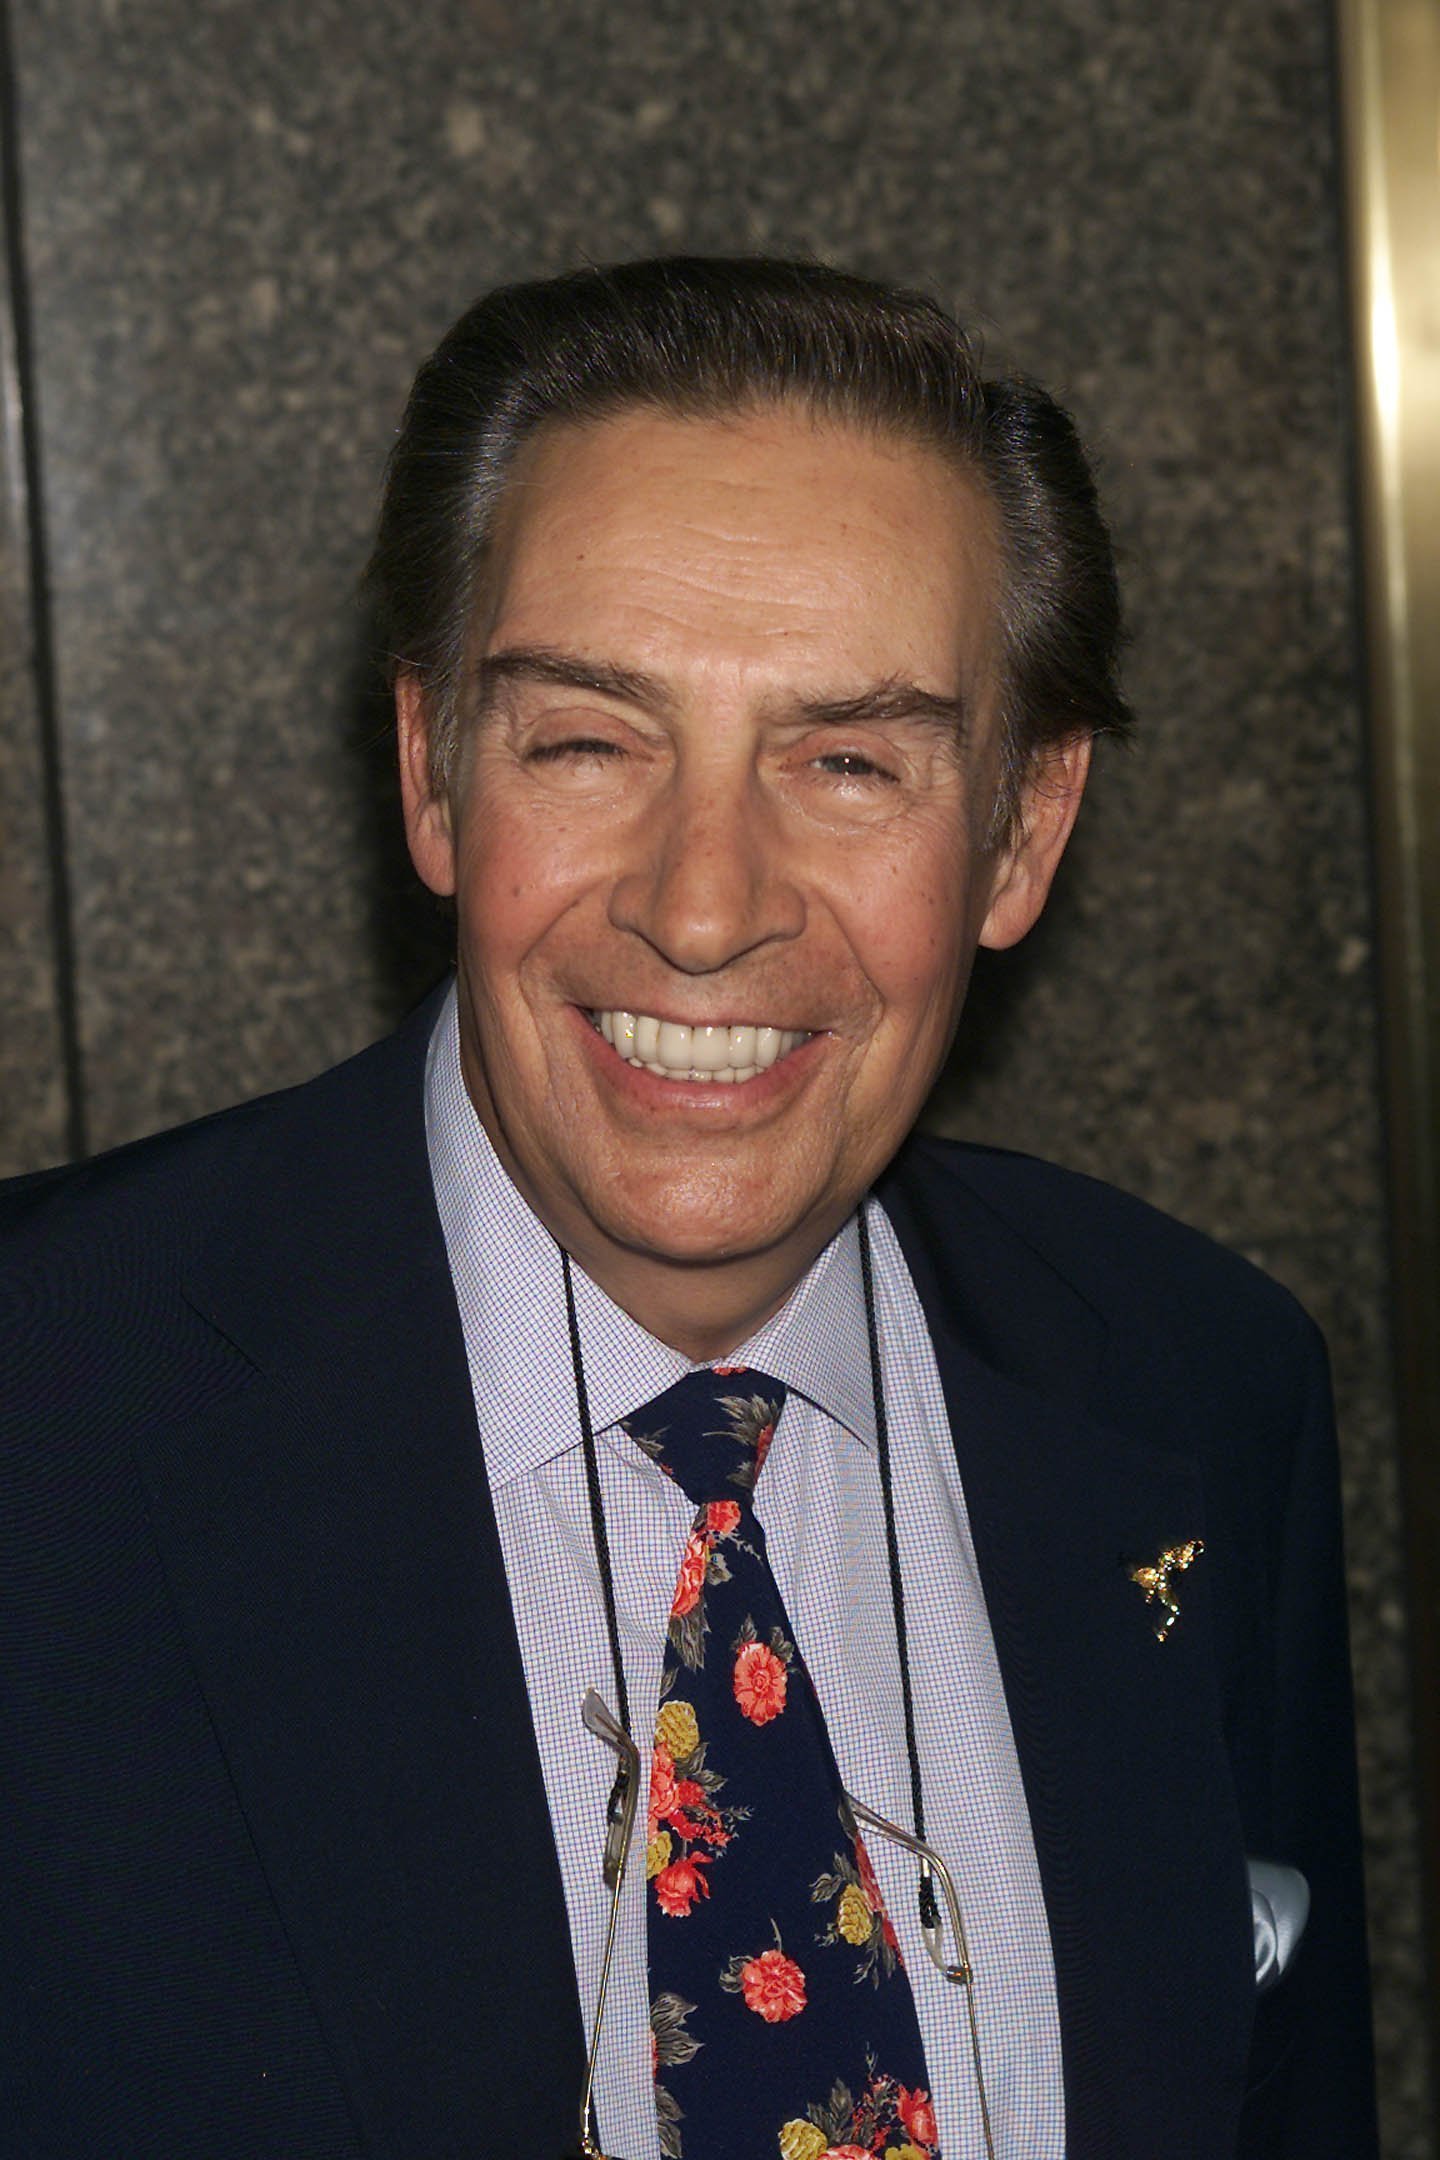 Jerry Orbach arrives at the NBC upfront at Radio City Music Hall in New York City, May 14, 2001 | Photo: GettyImages